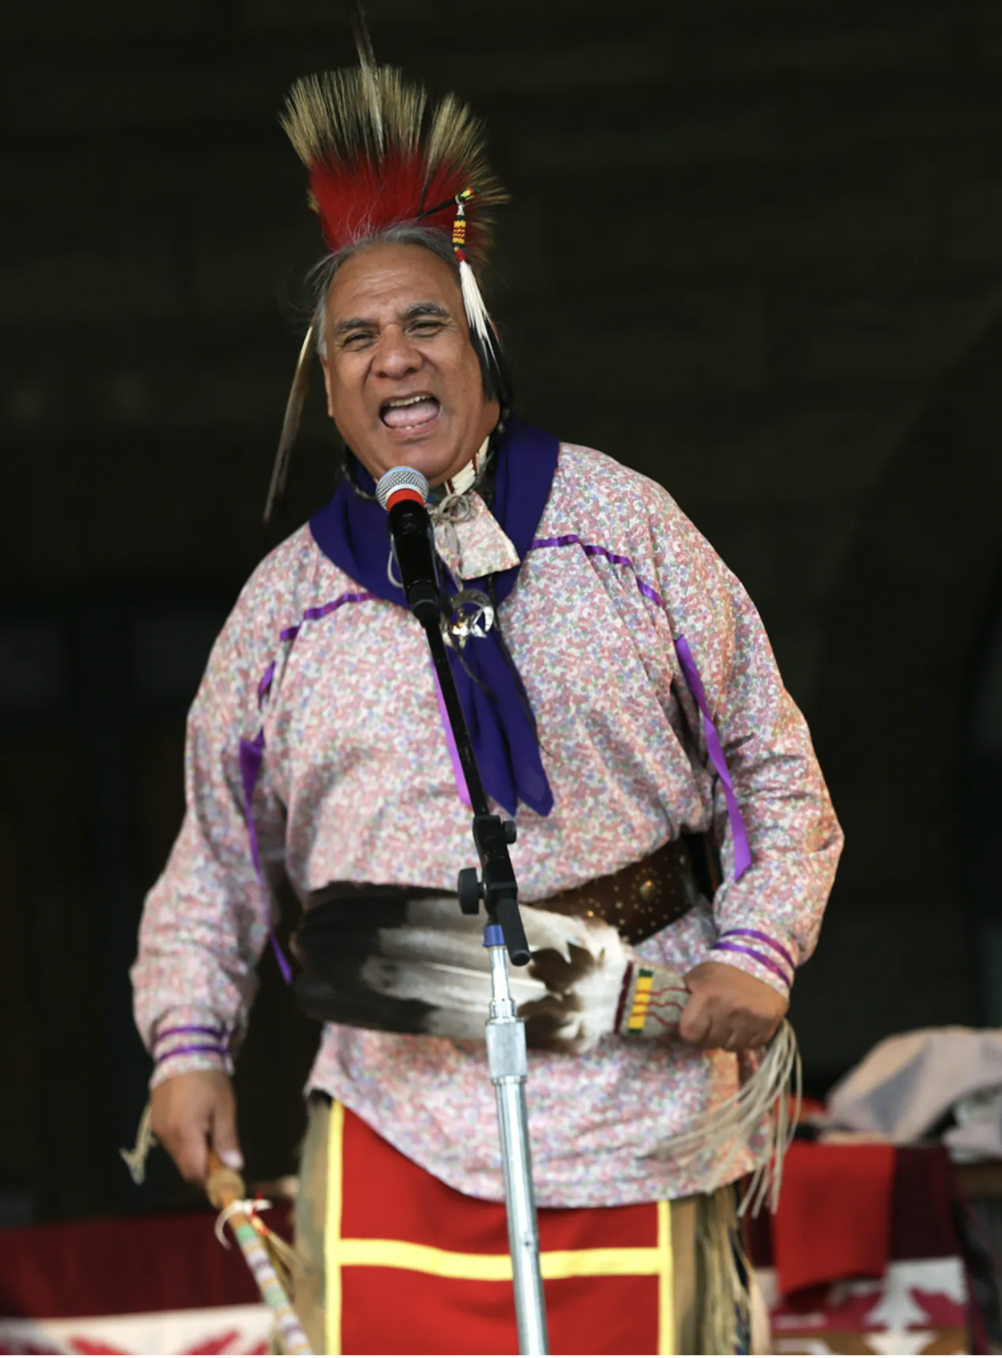 A man is dressed in traditional native american dress. He is singing into a microphone. 